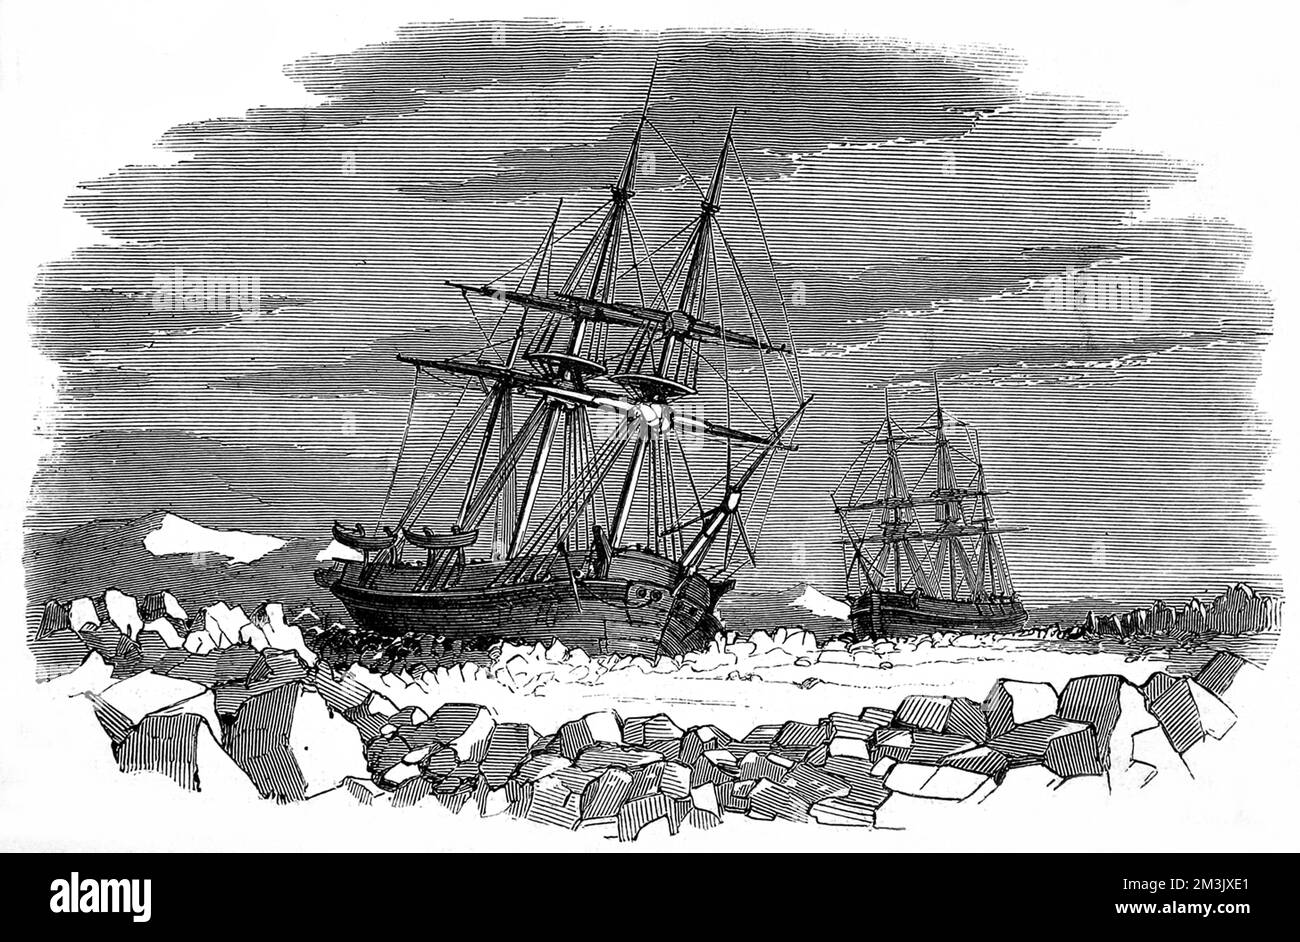 The 'Enterprise' and 'Investigator' surrounded by pack ice in Barrow's Straits, September 1849. These two ships were used by Sir James Clark Ross's Expedition of 1848-1849 to search the Arctic for signs of Sir John Franklin's ill-fated Arctic expedition of 1845.  In 1845 the British Admiralty sent two polar exploration ships, HMS 'Erebus' and HMS 'Terror', to look for the Northwest passage round the northern coast of Canada. The expedition, commanded by Sir John Franklin, disappeared from view late in 1845 and none of the men were ever seen again.   In fact the ships made it to the Stock Photo